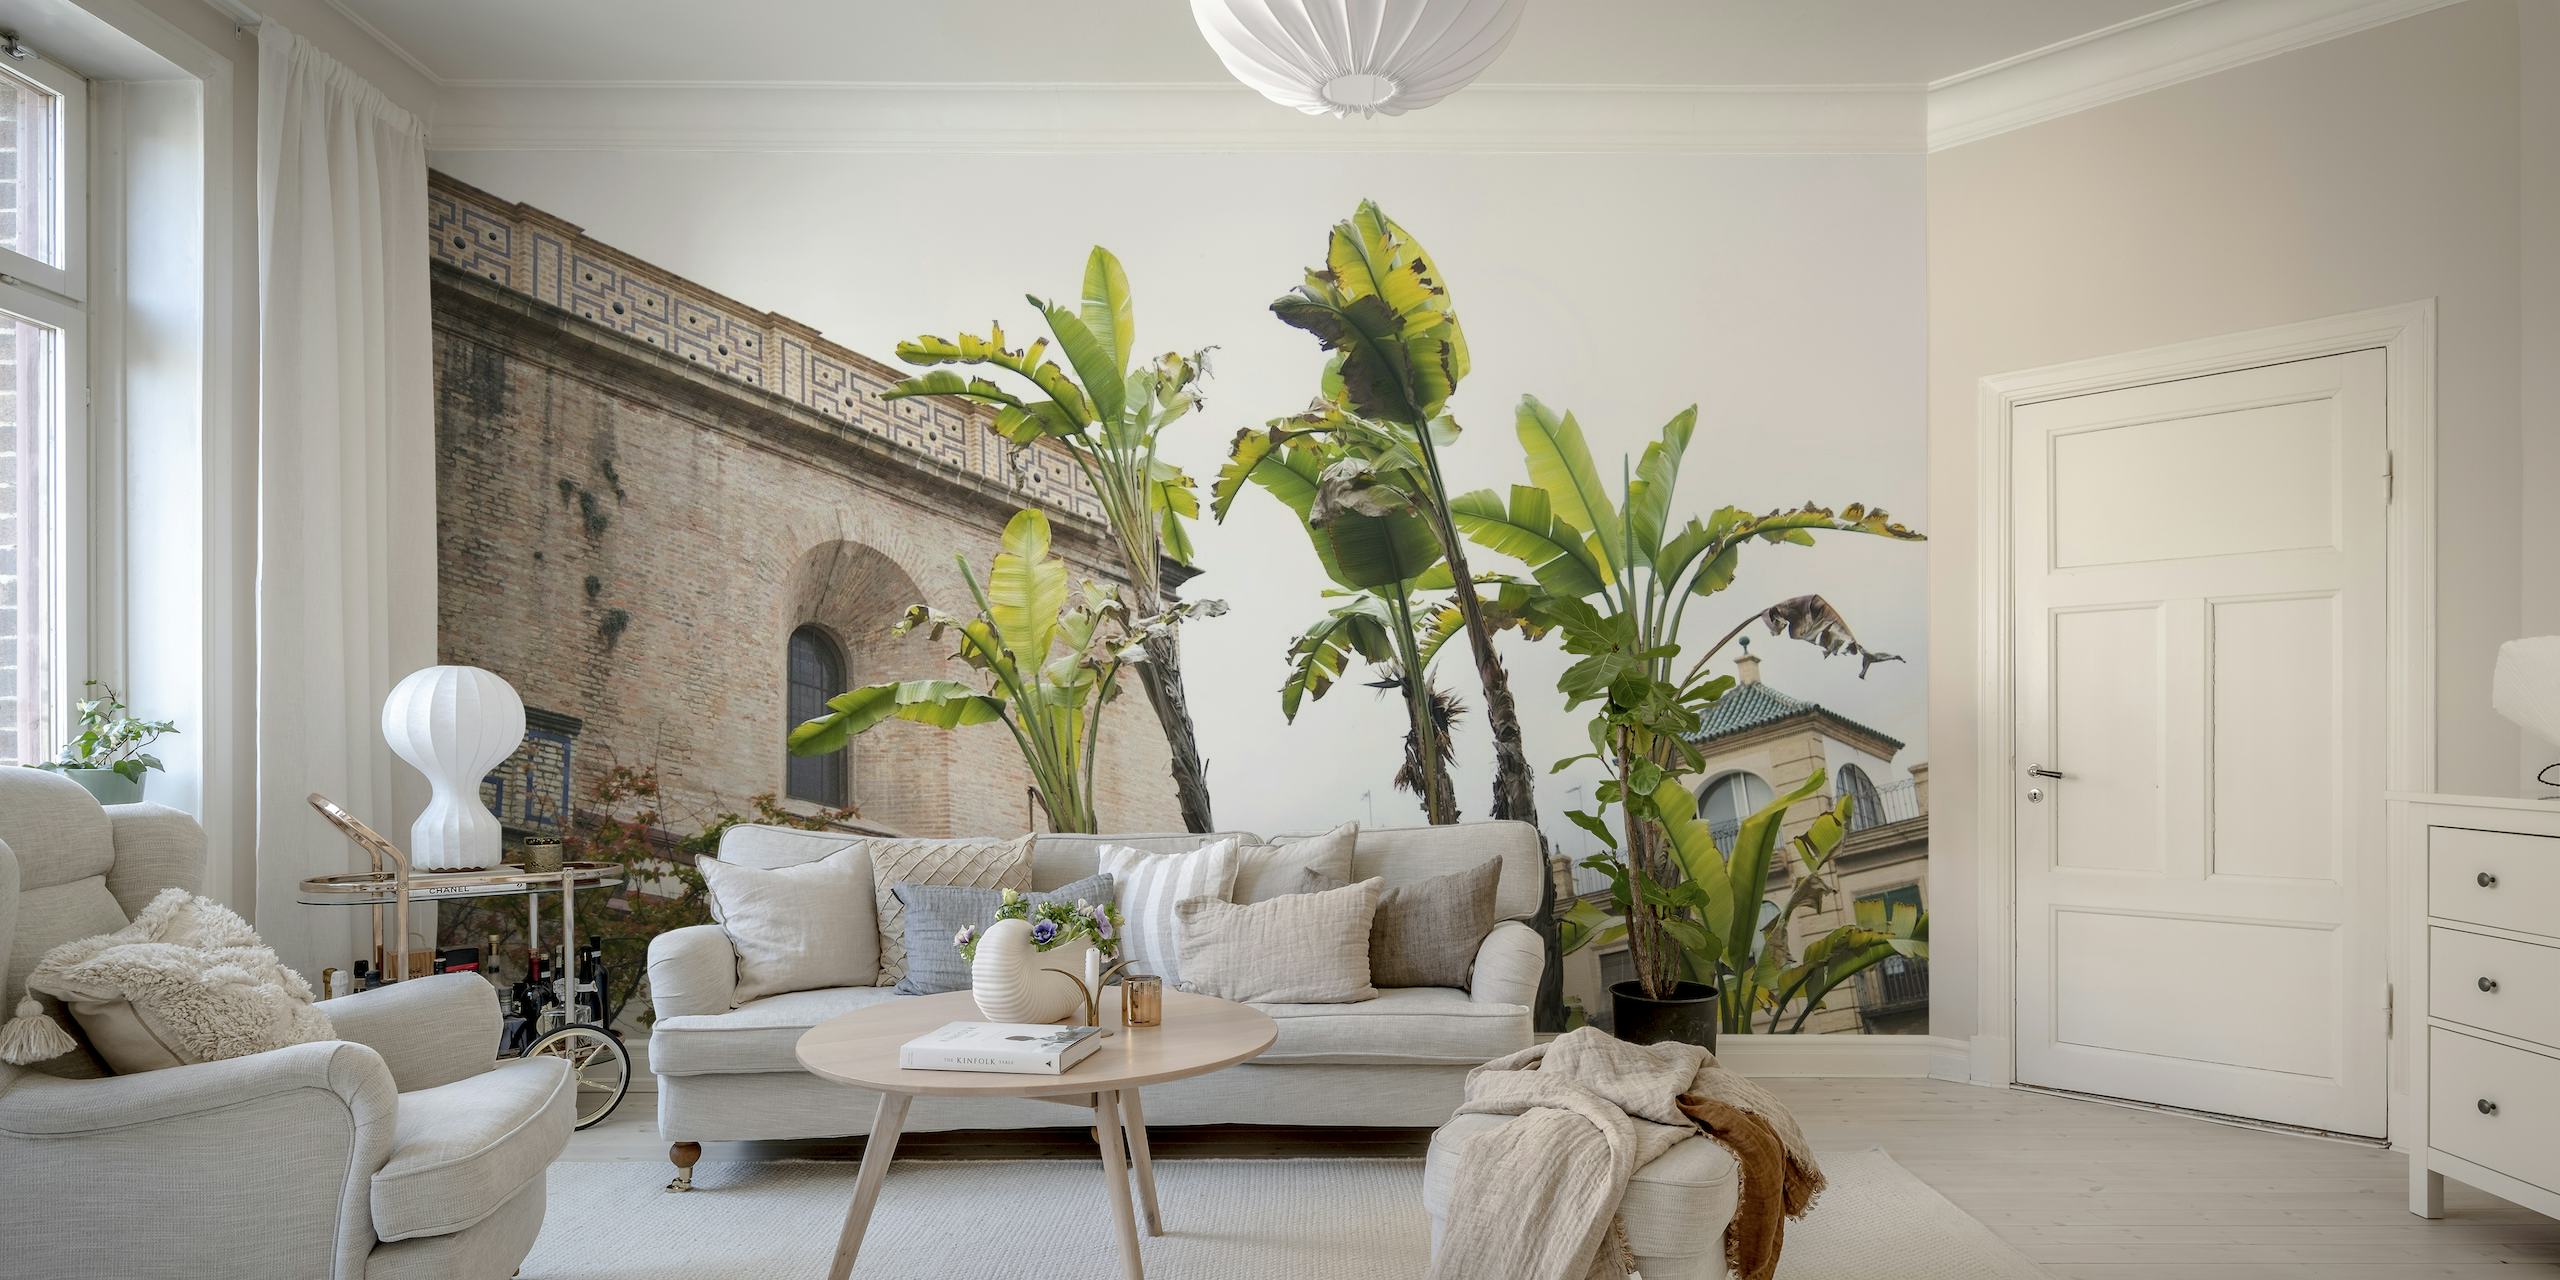 Seville Building with Tropical White Bird of Paradise Plant Wall Mural